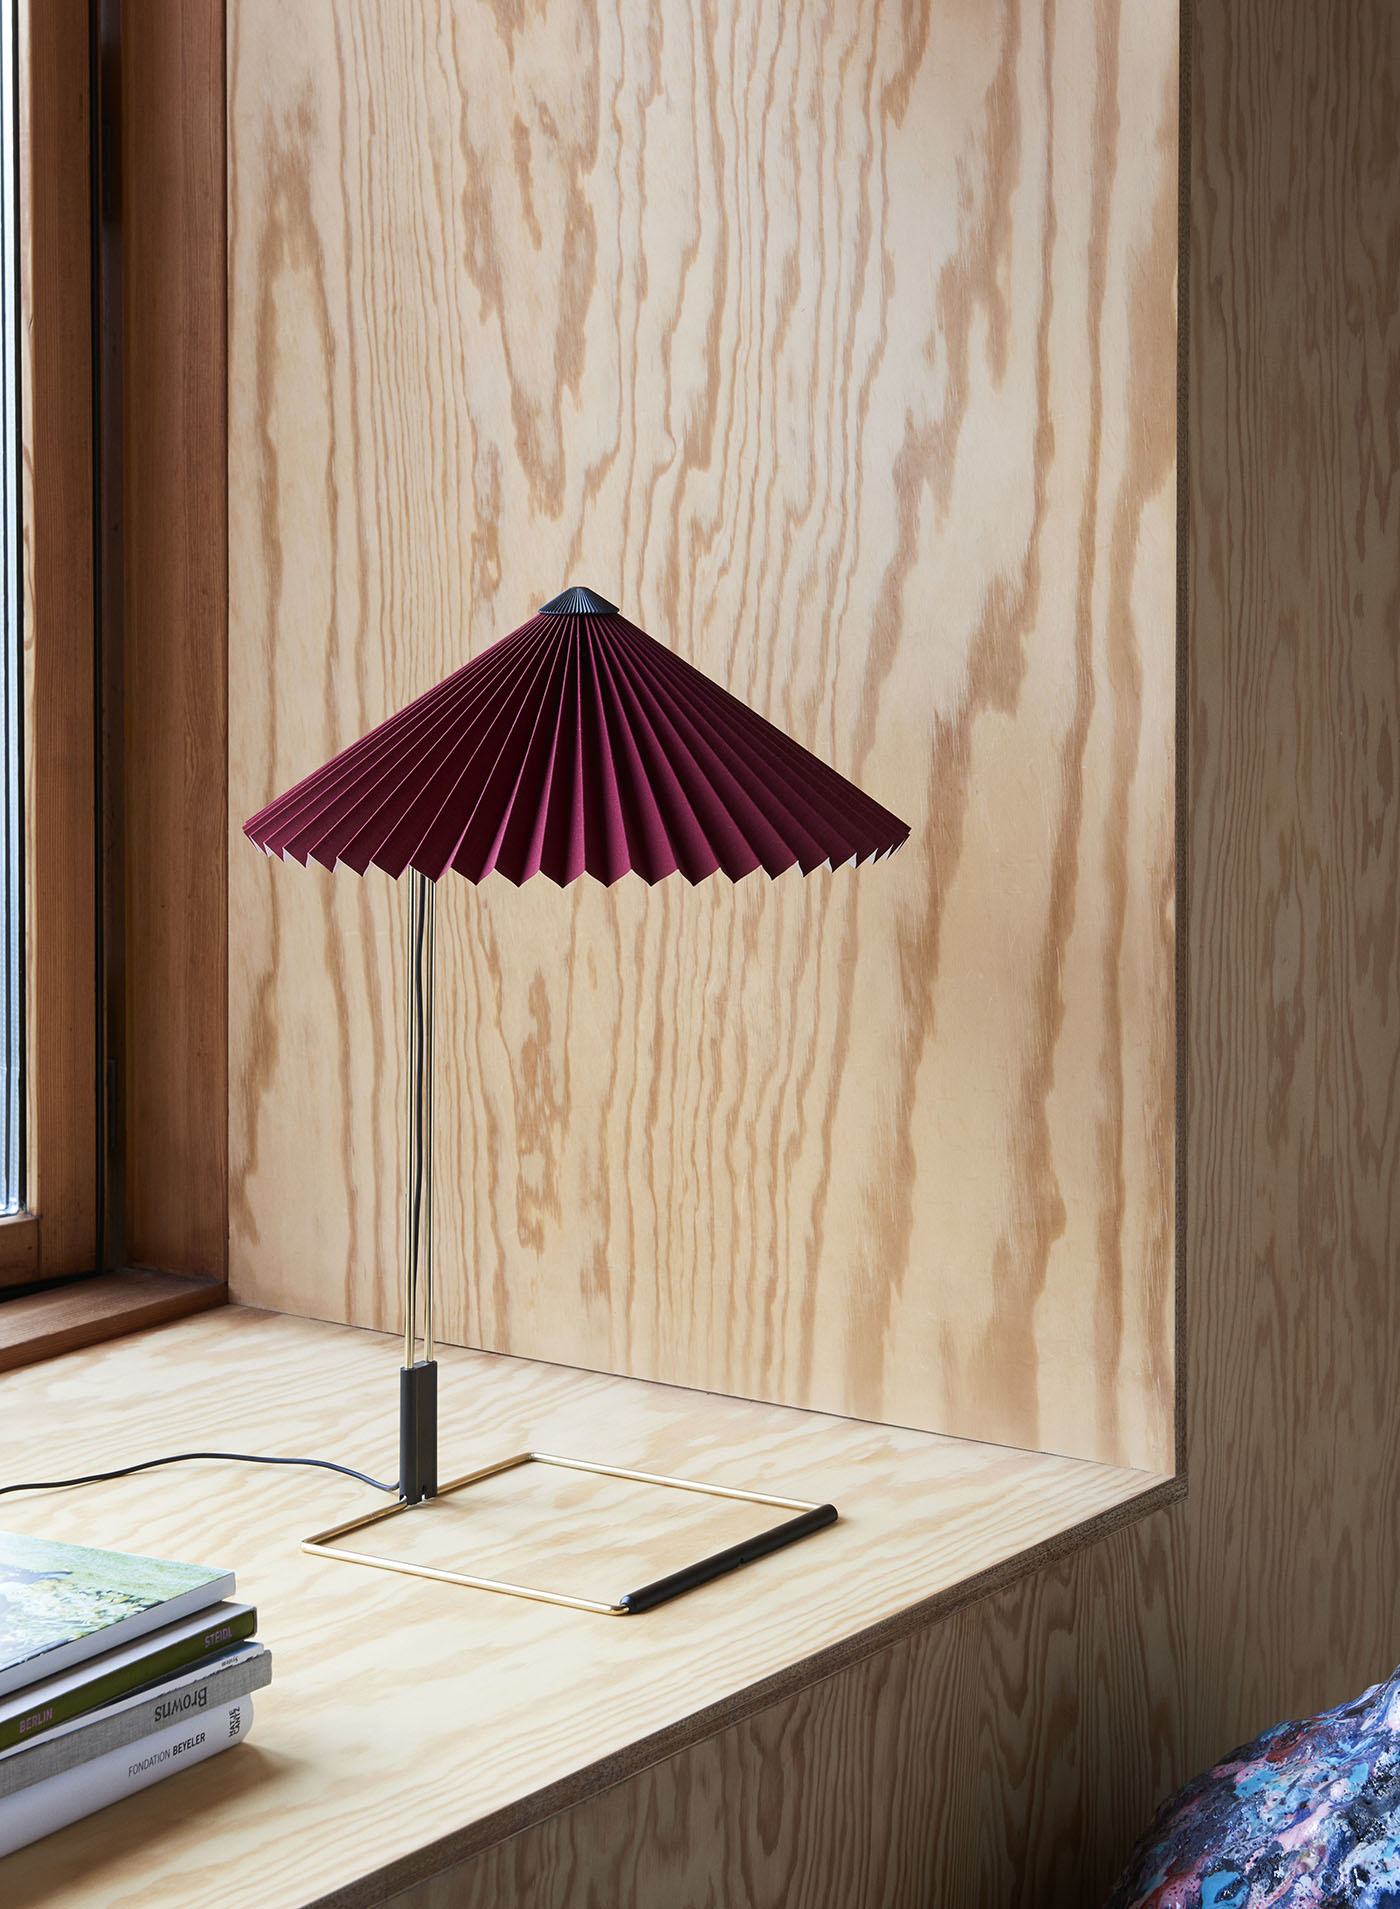 Matin Table Lamp Large Oxide Red